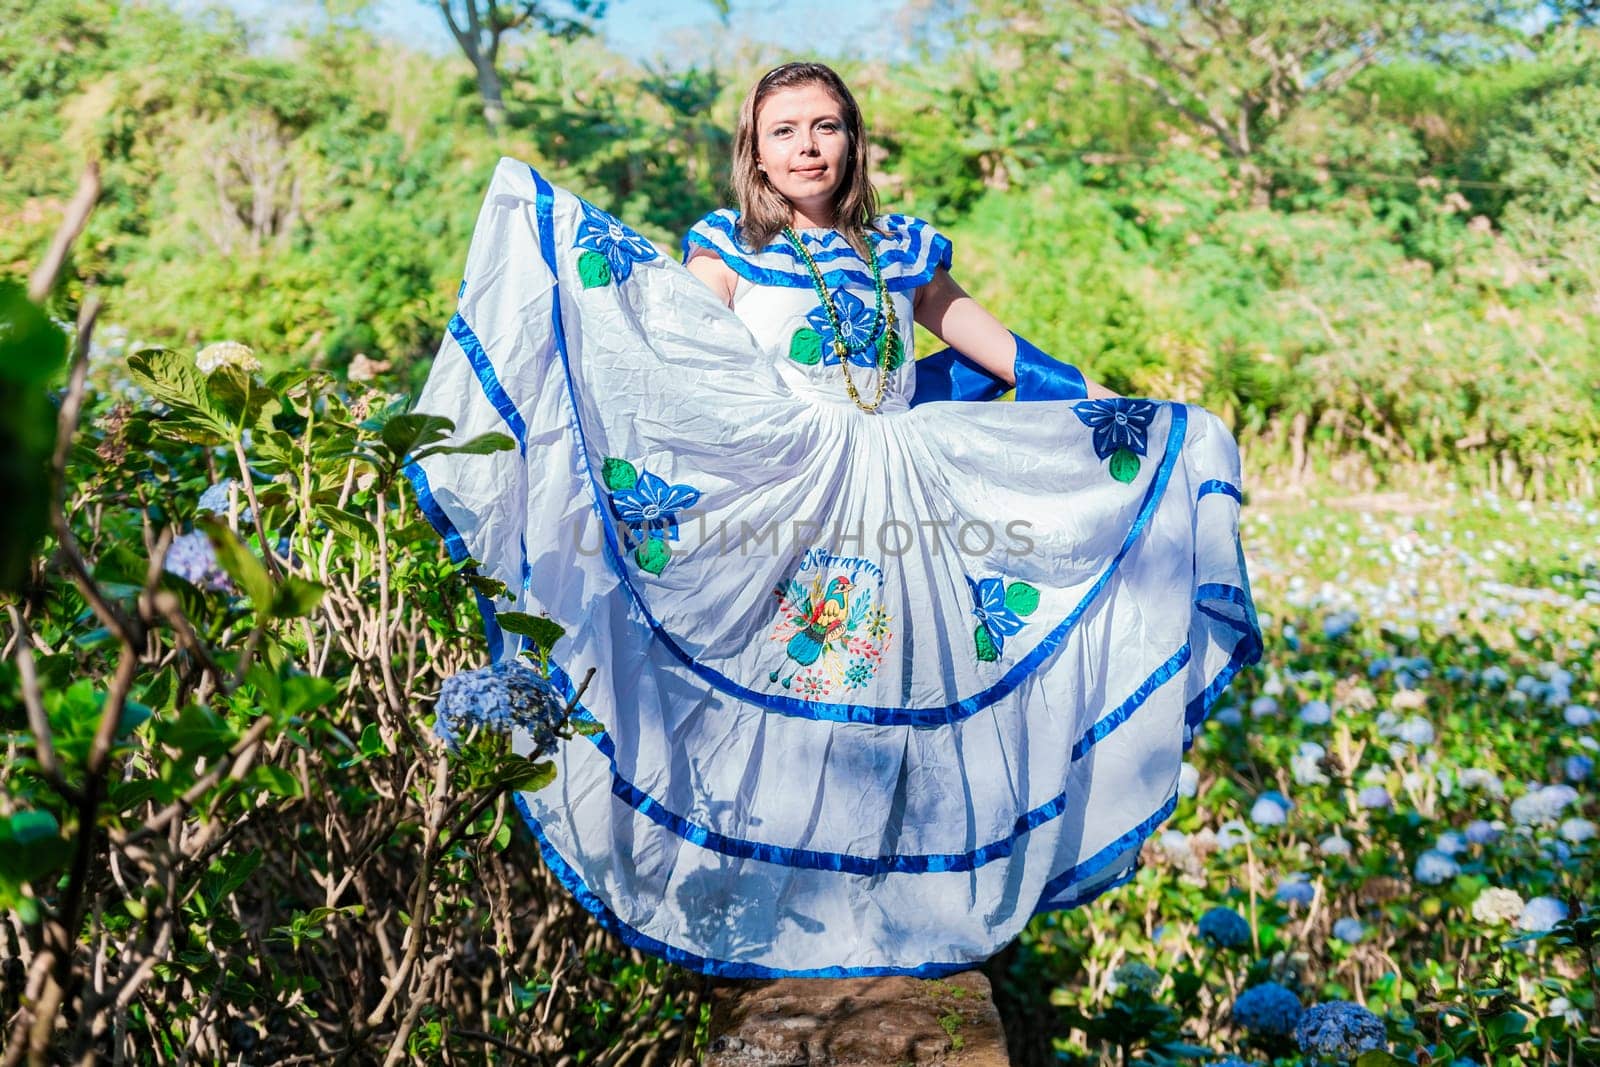 Nicaraguan woman in traditional folk costume in a field of Milflores, Smiling woman in national folk costume in a field surrounded by flowers. People in Nicaraguan national folk costume